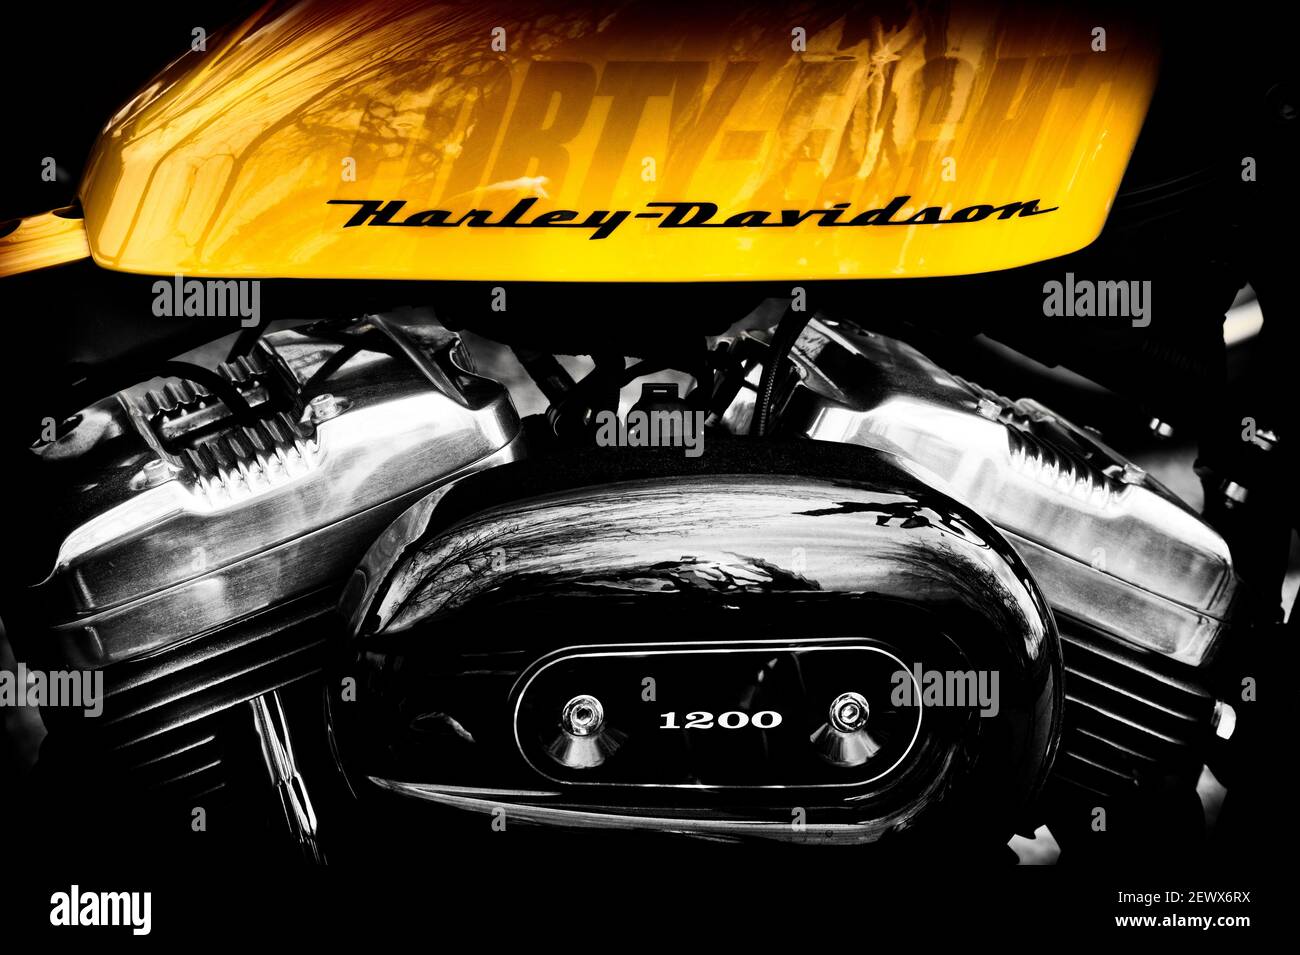 Harley Davidson 48 motorcycle. Spot coloured Black and White Stock Photo